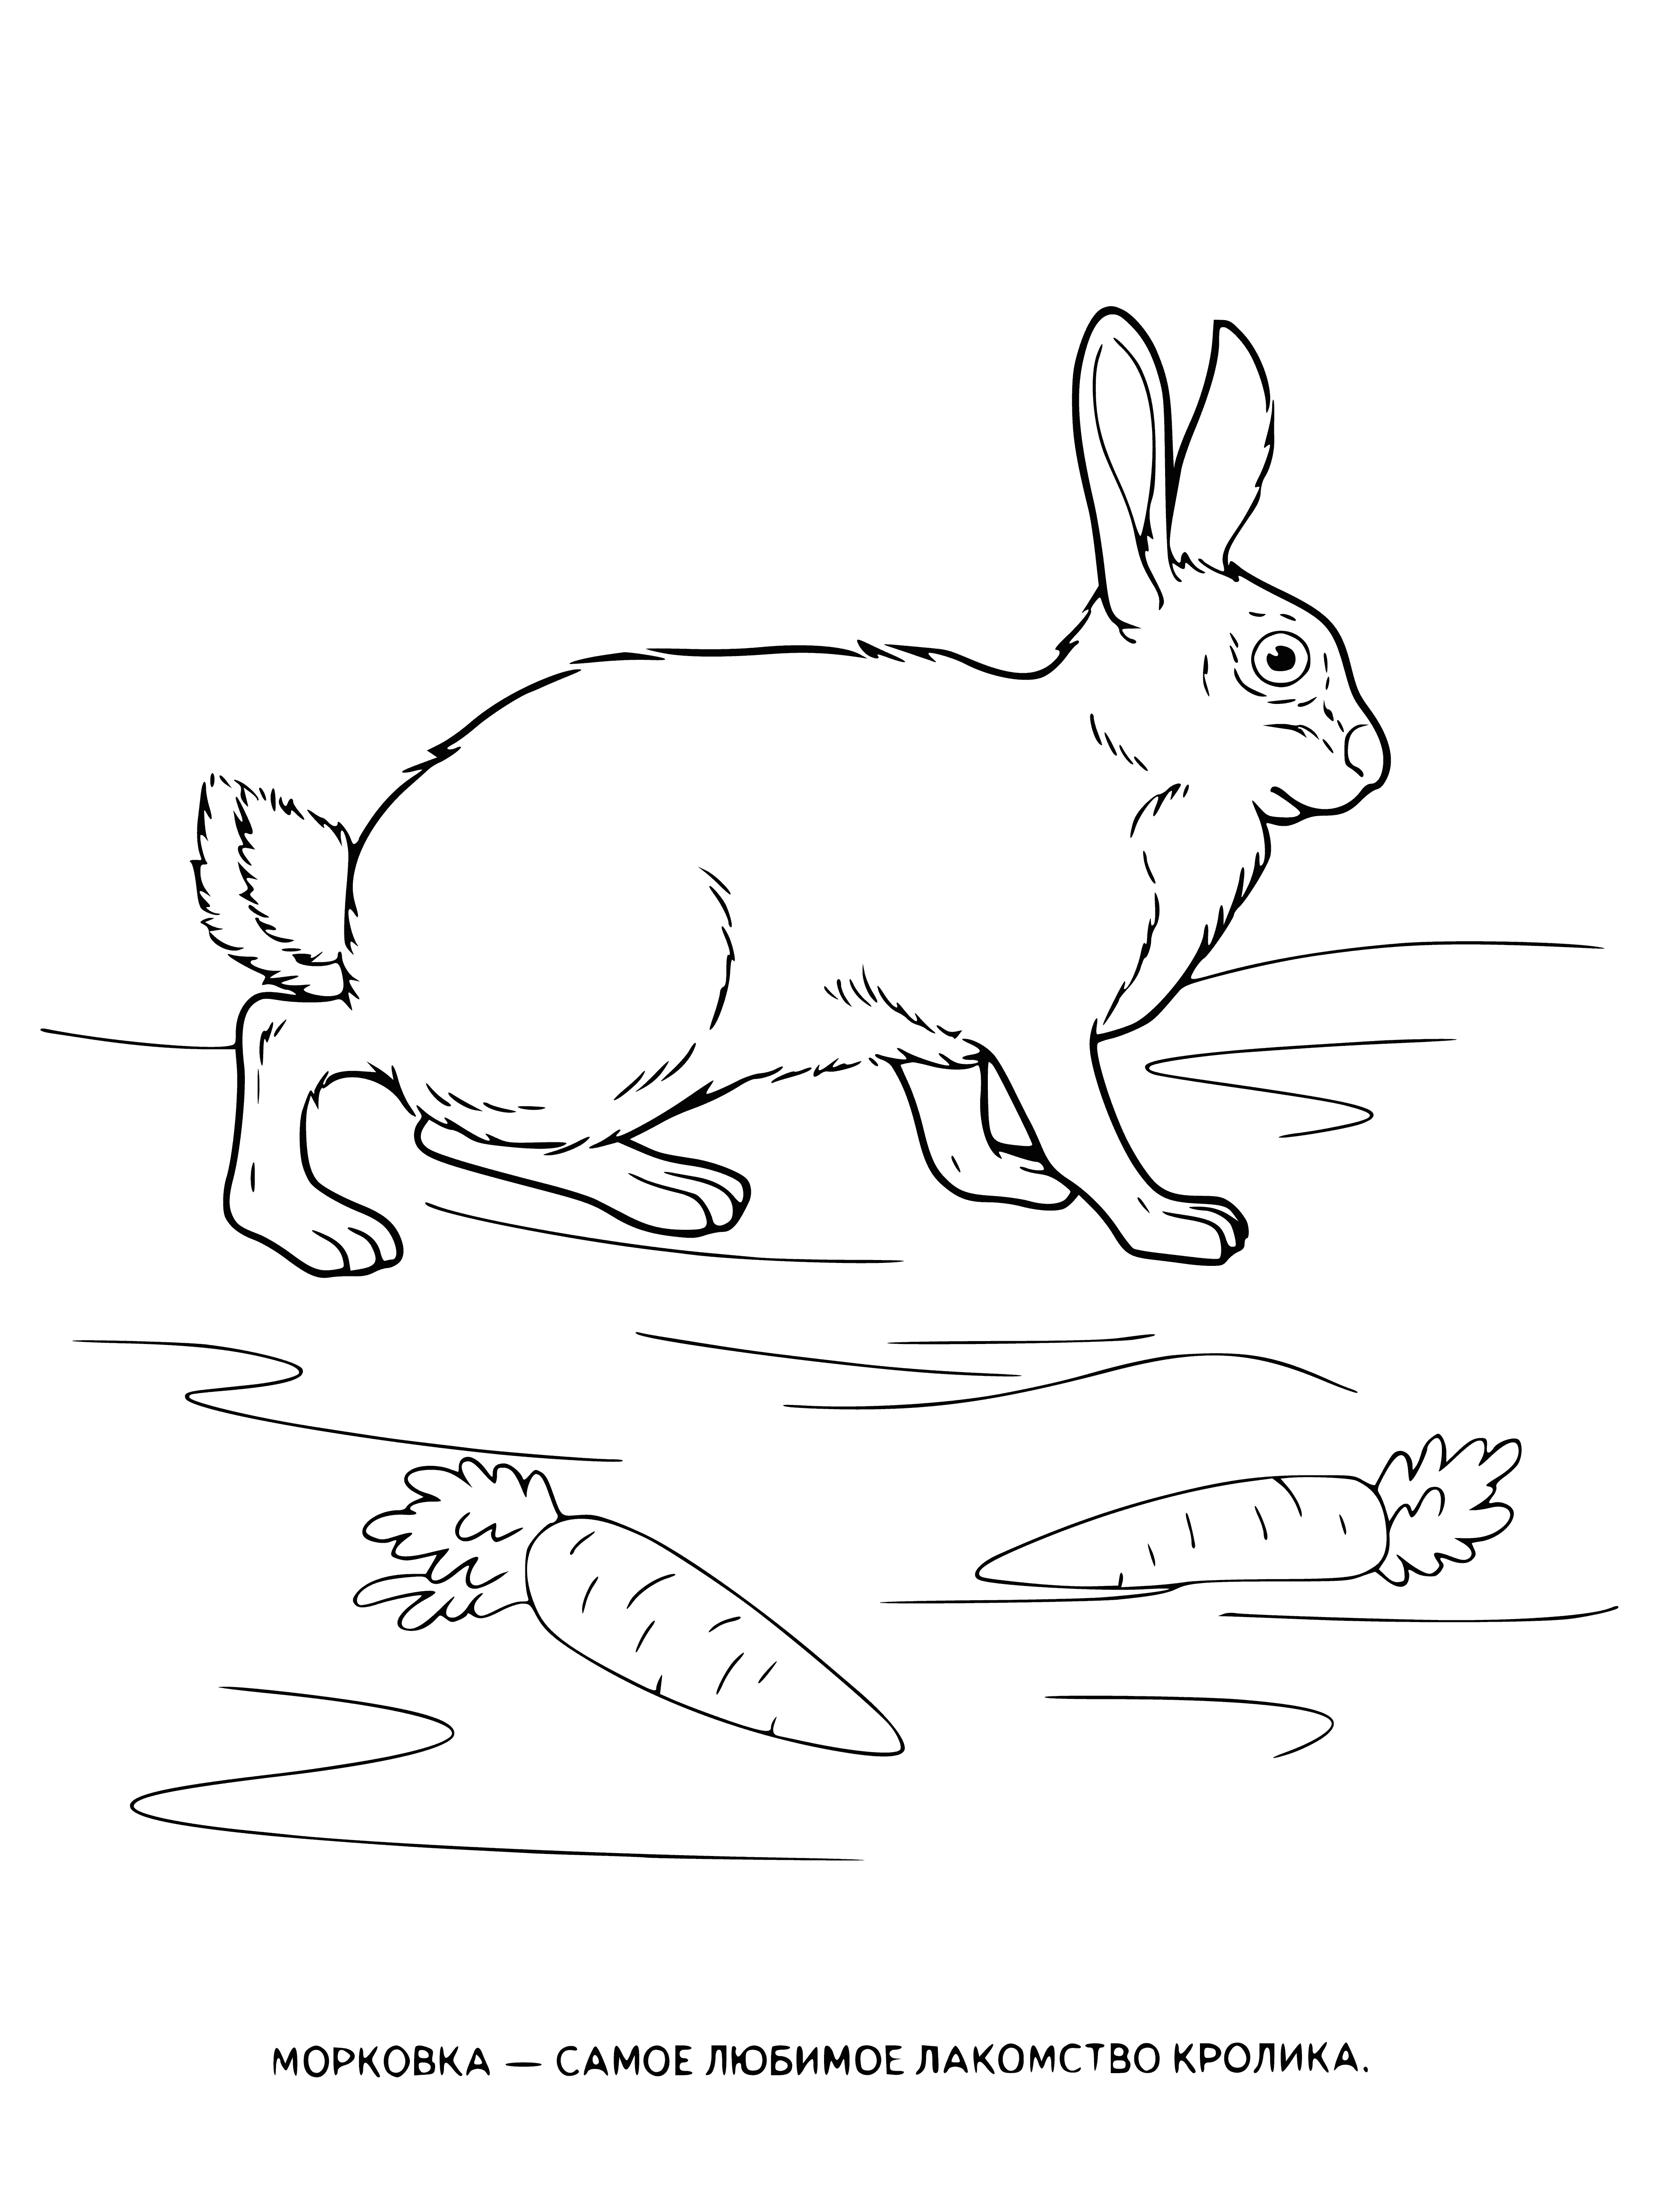 coloring page: Small white rabbit with black eyes, long ears, soft fur. Sitting on hind legs, front paws raised. Long black nose, sharp white teeth.